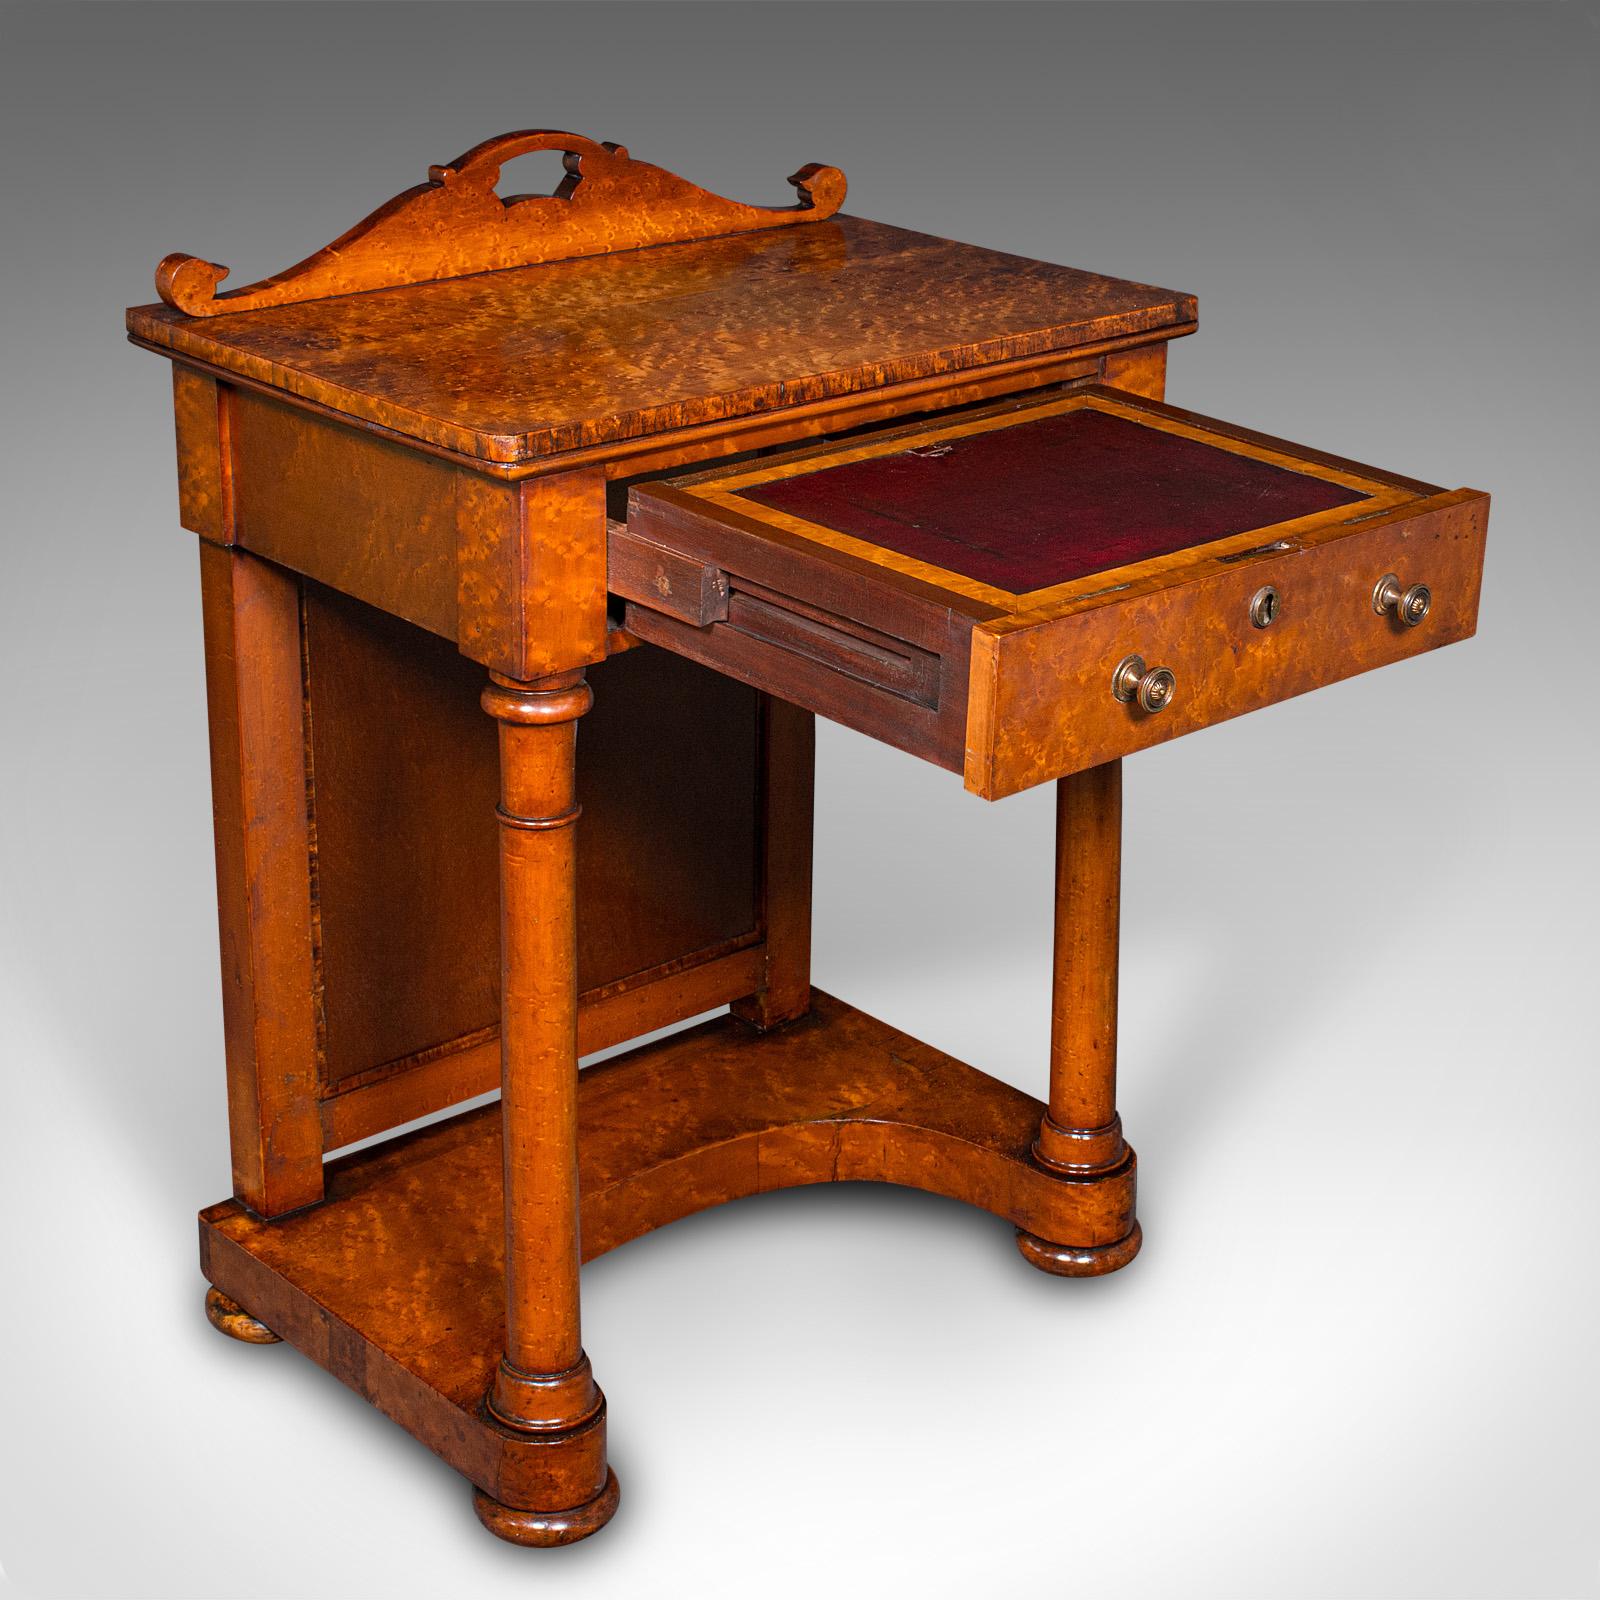 This is an antique ship's purser's desk. An English, burr walnut Davenport writing table in the Beidermeier taste, dating to the Victorian period, circa 1880.

Exquisite craftsmanship with superb colour and figuring
Displays a desirable aged patina